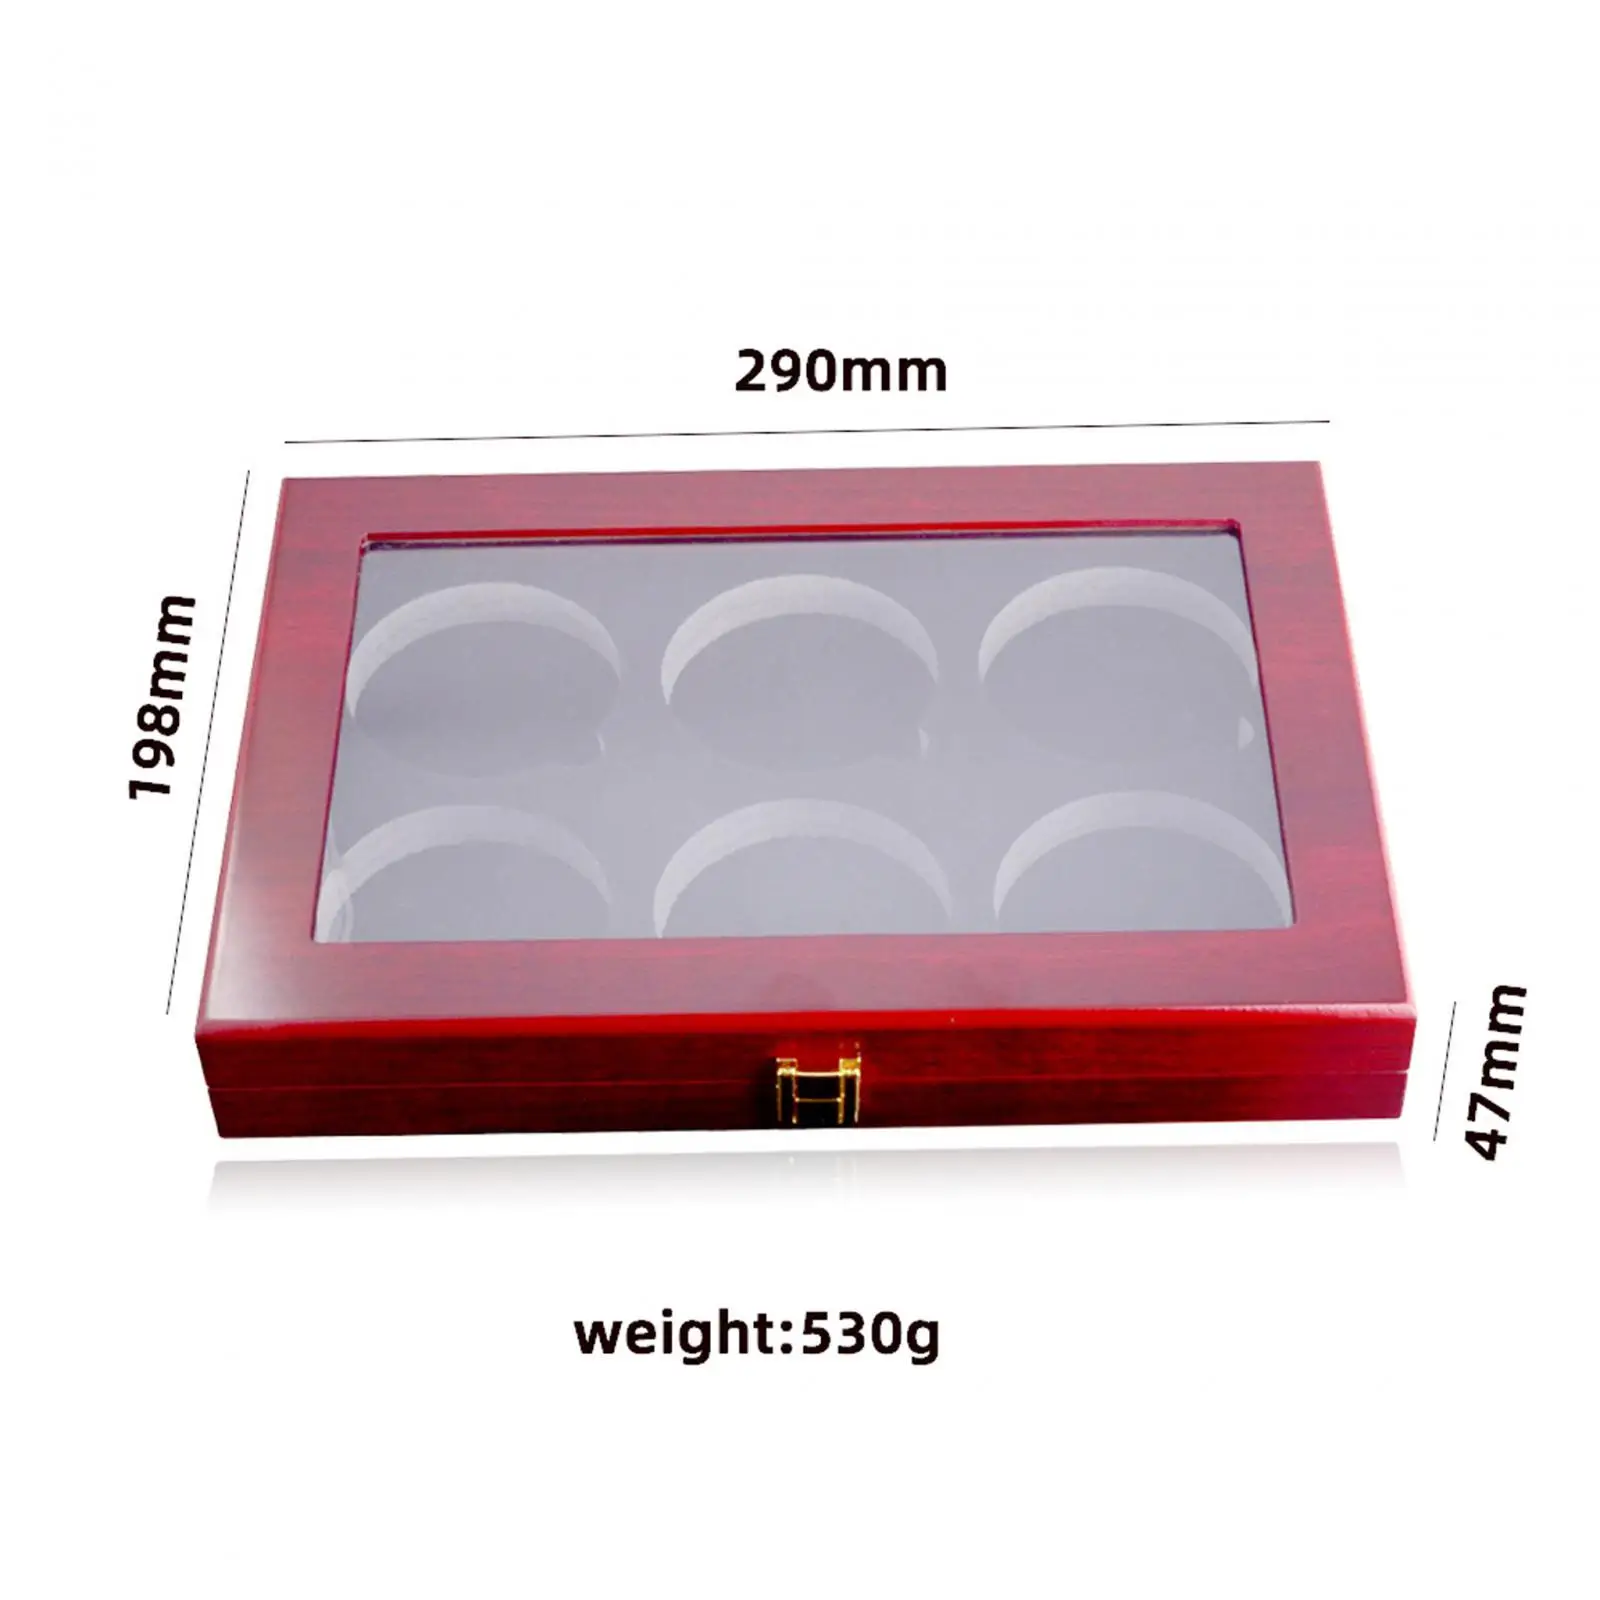 6 Holes Hockey Puck Display Case Wooden Easy to Use with Lock with Protection Door Cabinet Holder Rack Shadow Box Puck Holder